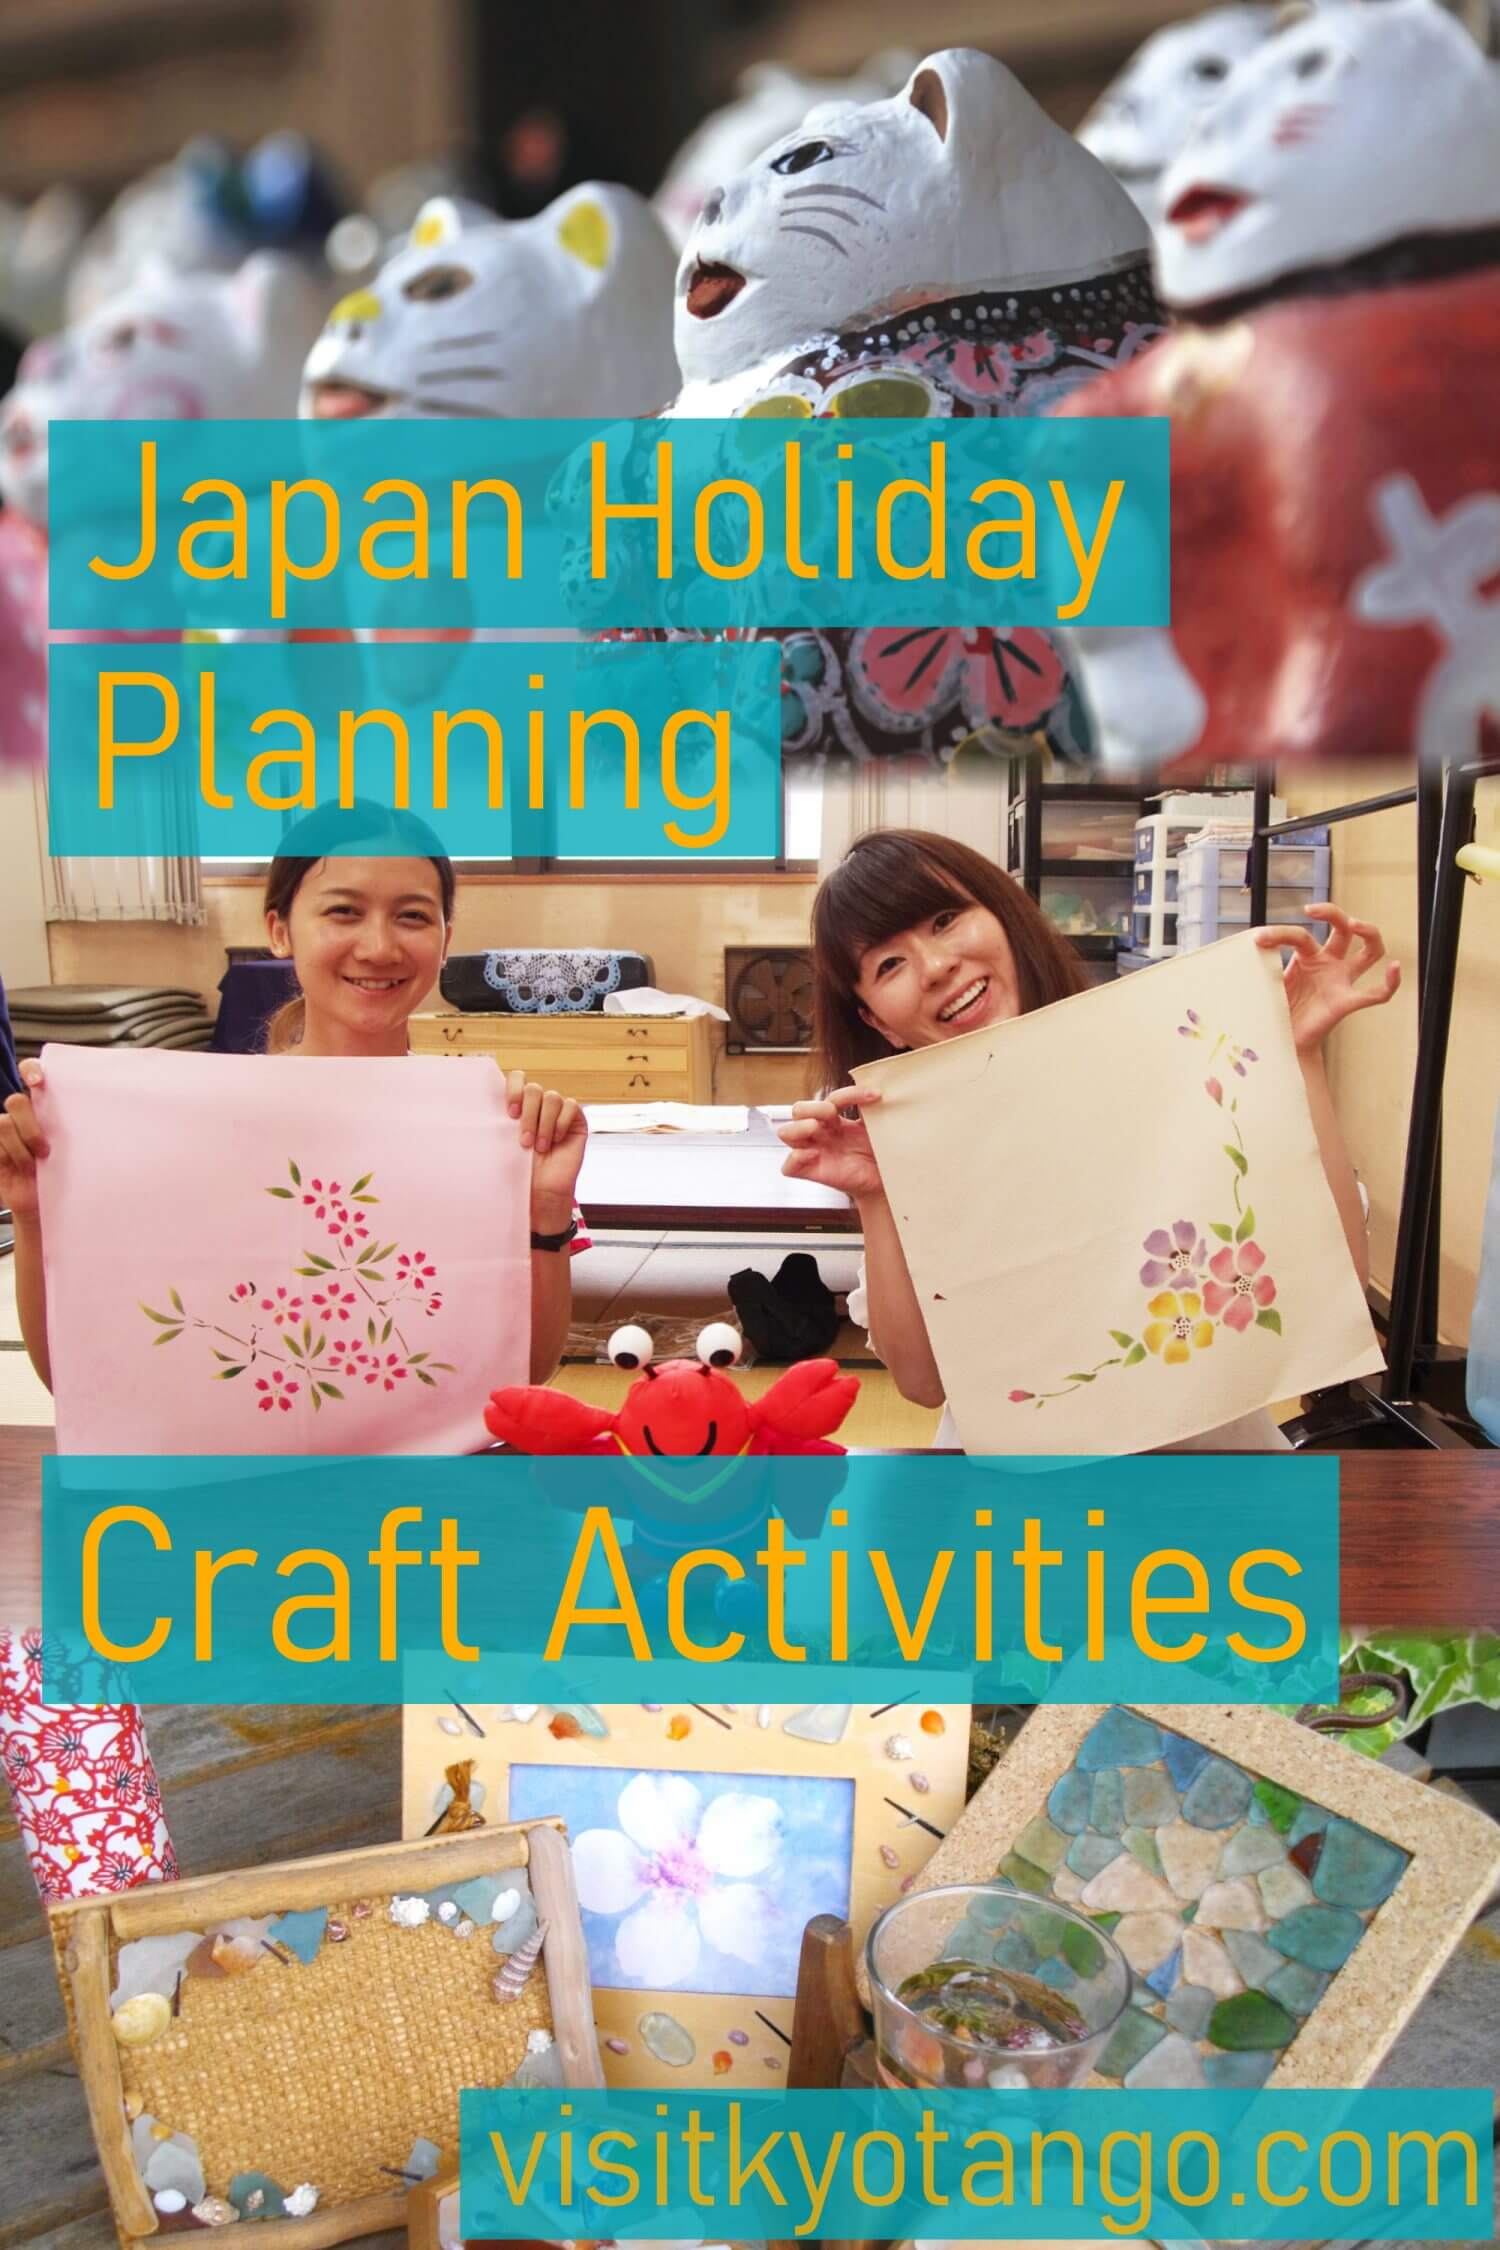 8 Craft Activities in Kyotango Planning your Japan Holiday Visit